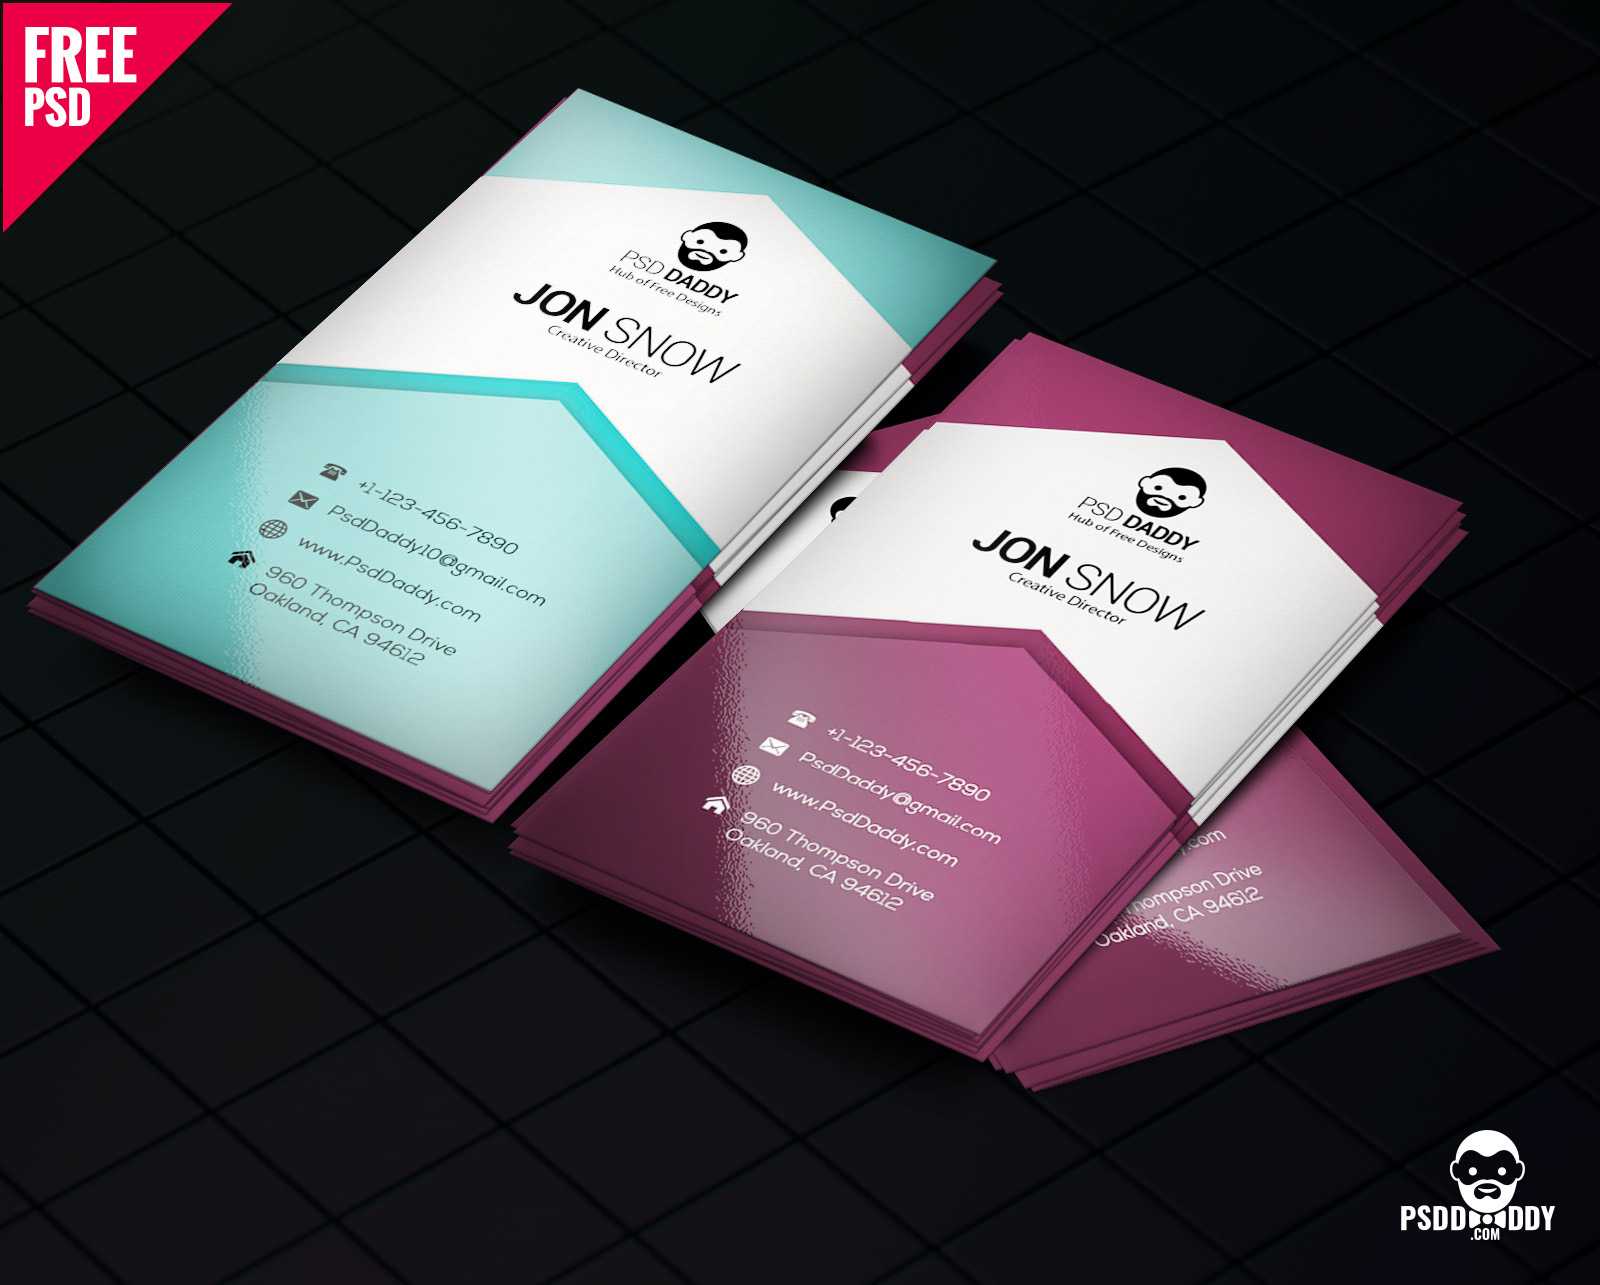 Download]Creative Business Card Psd Free | Psddaddy Inside Business Card Size Photoshop Template